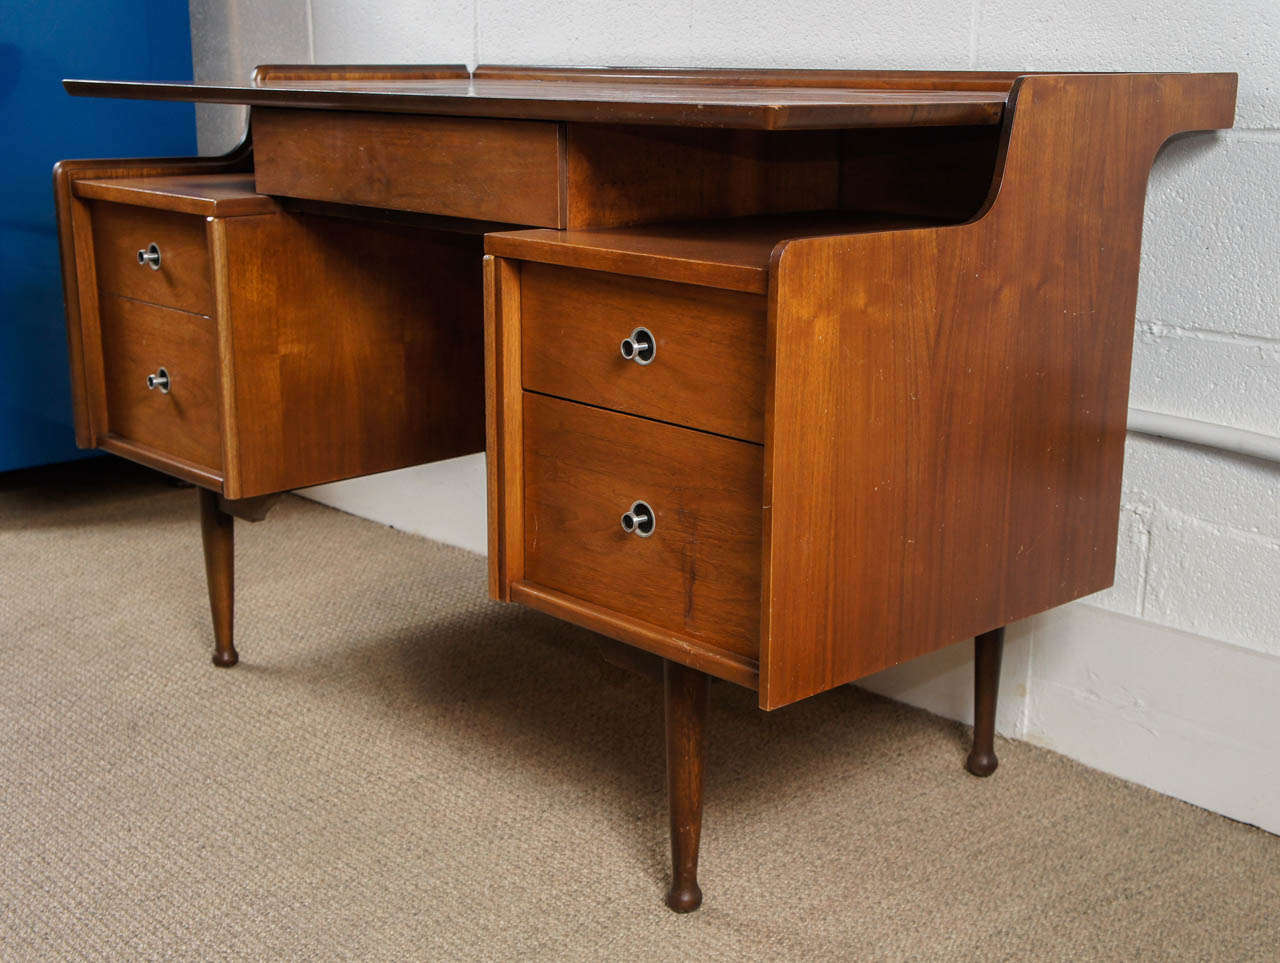 Here is a modern desk in a walnut finish by Hooker. This stylish small scale desk has a file drawer on the left and a raised platform top.